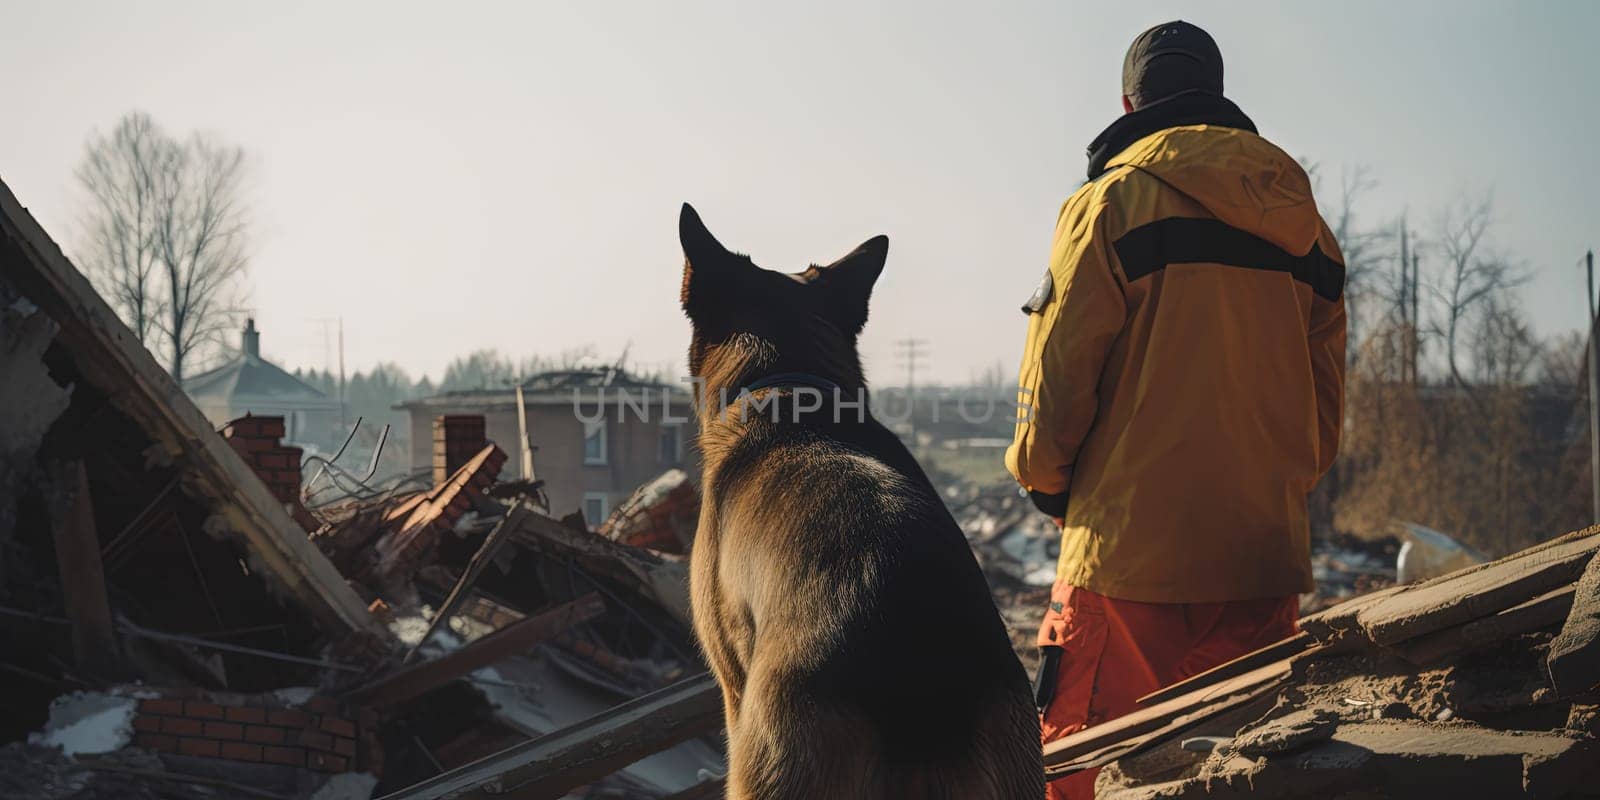 Rescuer With A Dog At The Site Of A Destroyed House During An Earthquake by tan4ikk1